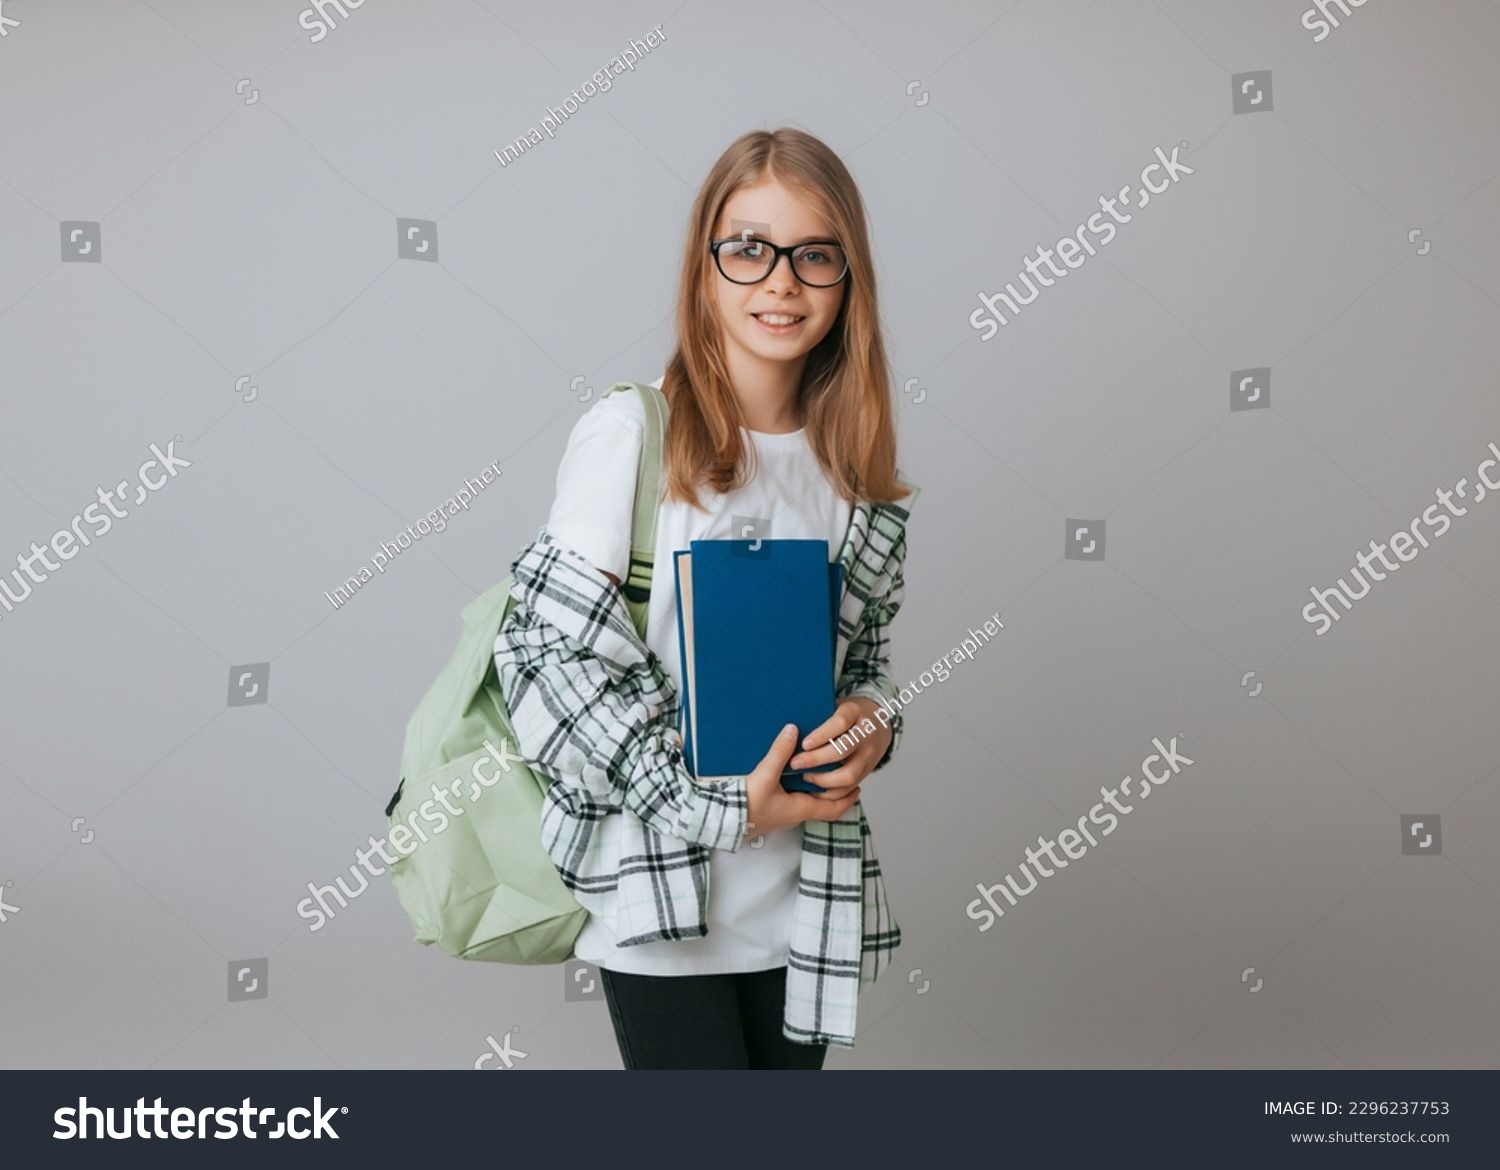 Smiling little schoolgirl 11-13 years old with backpack holding book isolated on gray background studio portrait. The concept of children's lifestyle. Education at school. #2296237753